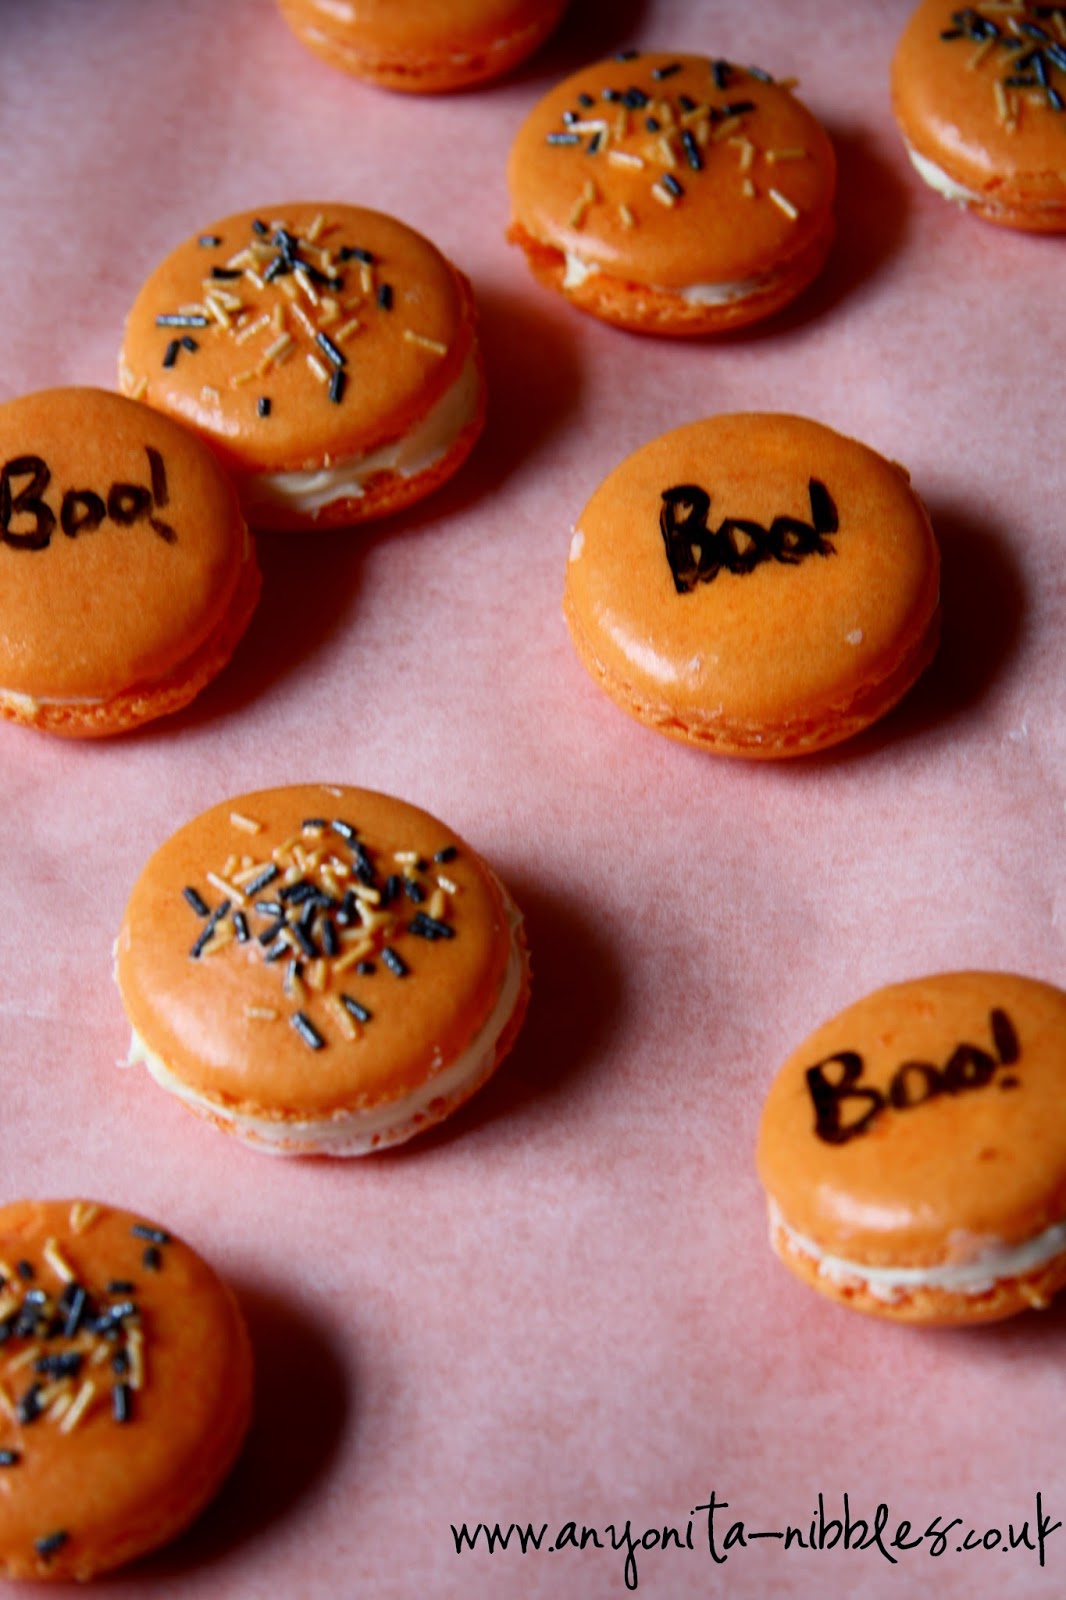 A scattering of gluten free macarons for Halloween from www.anyonita-nibbles.co.uk